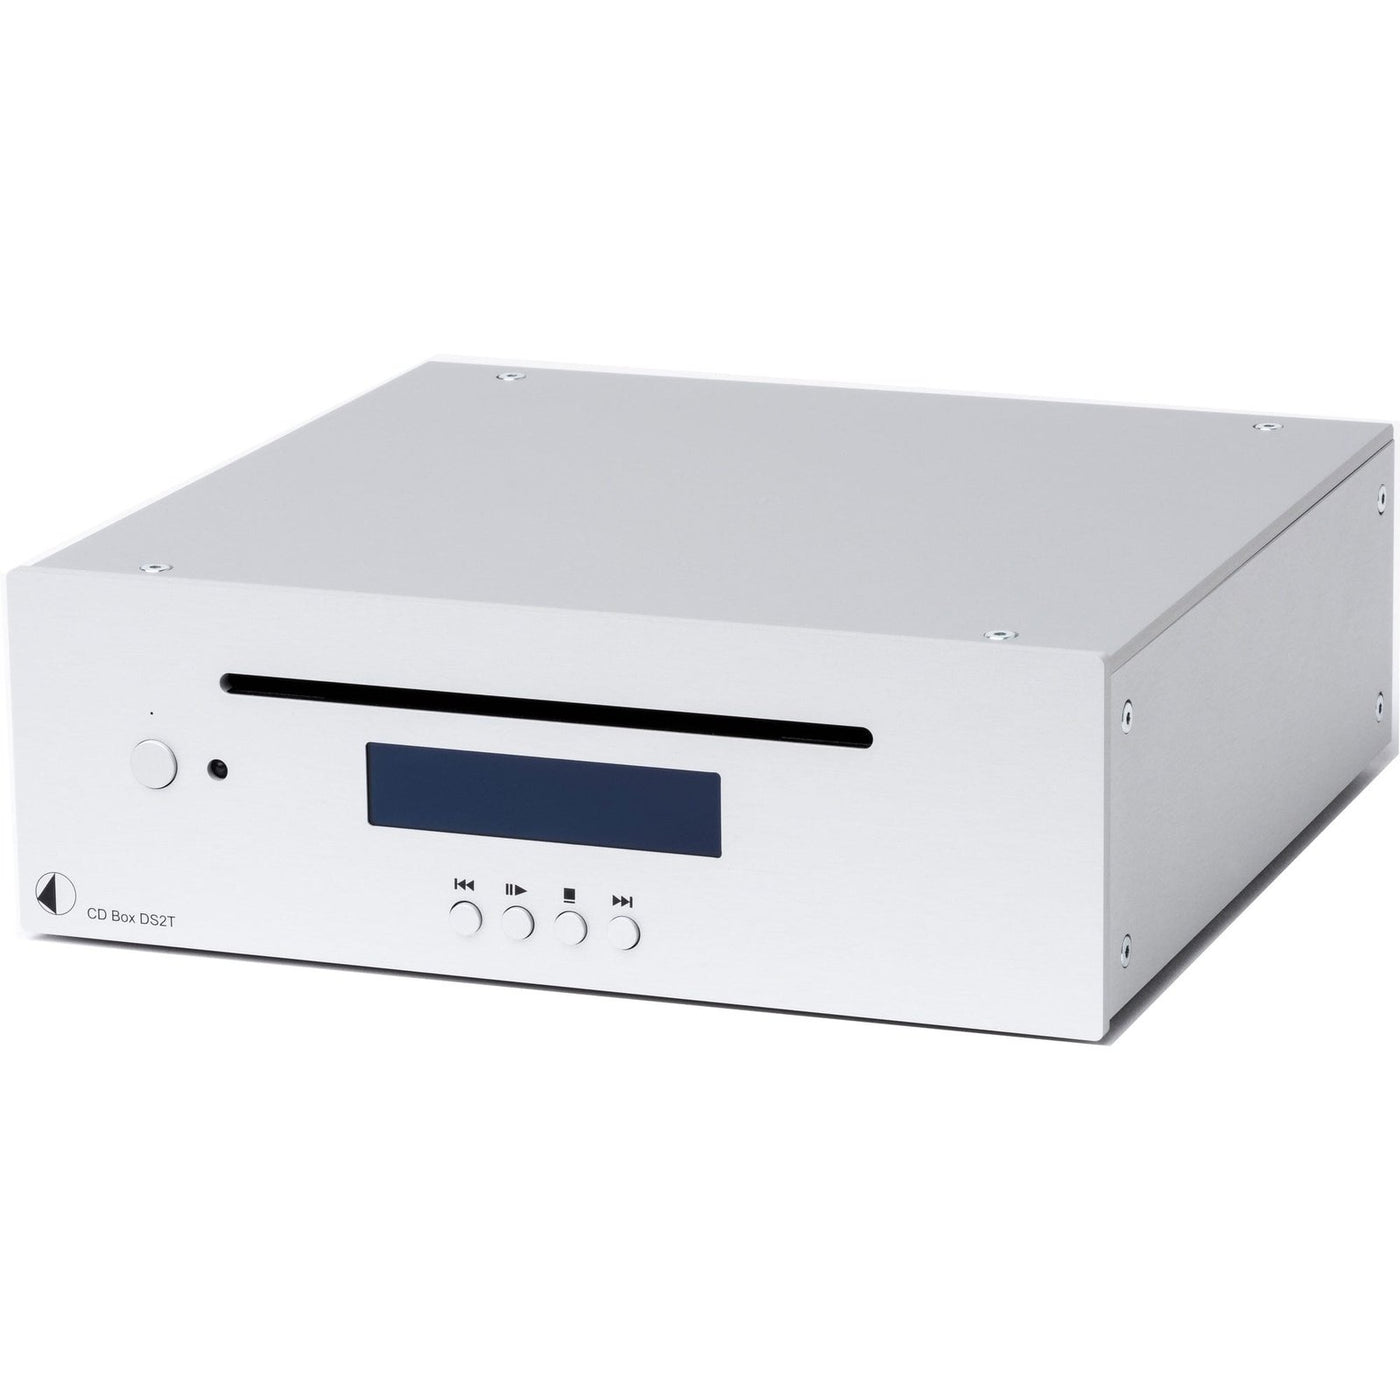 Pro-Ject Pro-Ject CD Box DS2 T - Silver CD Players